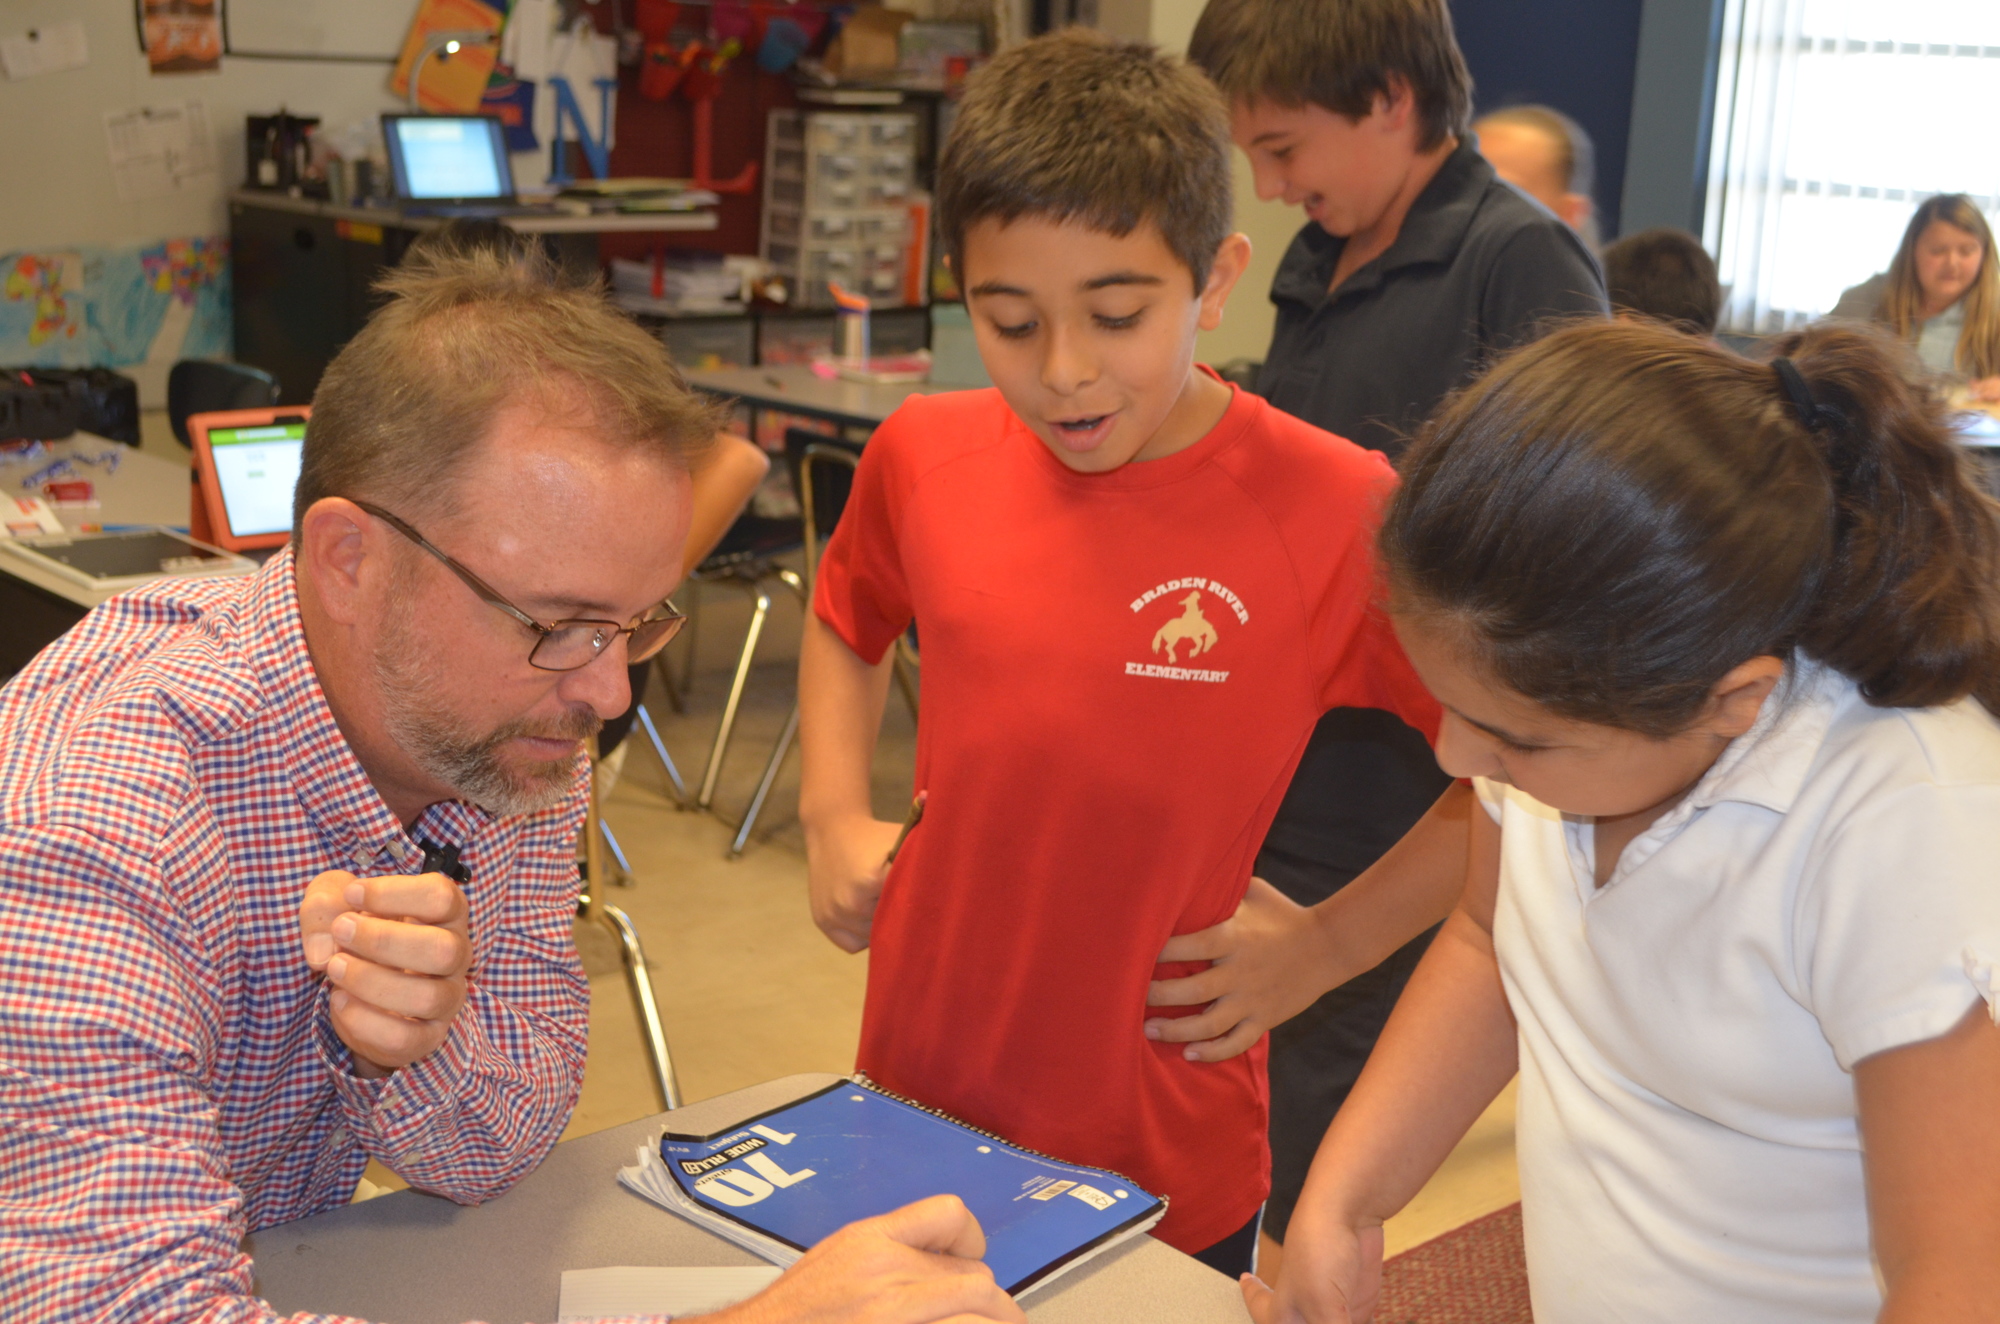 Braden River Elementary School fourth grade teacher Nicholas Leduc helps his students Elias Katra and Parmis Cyrus during “independent time” in class.